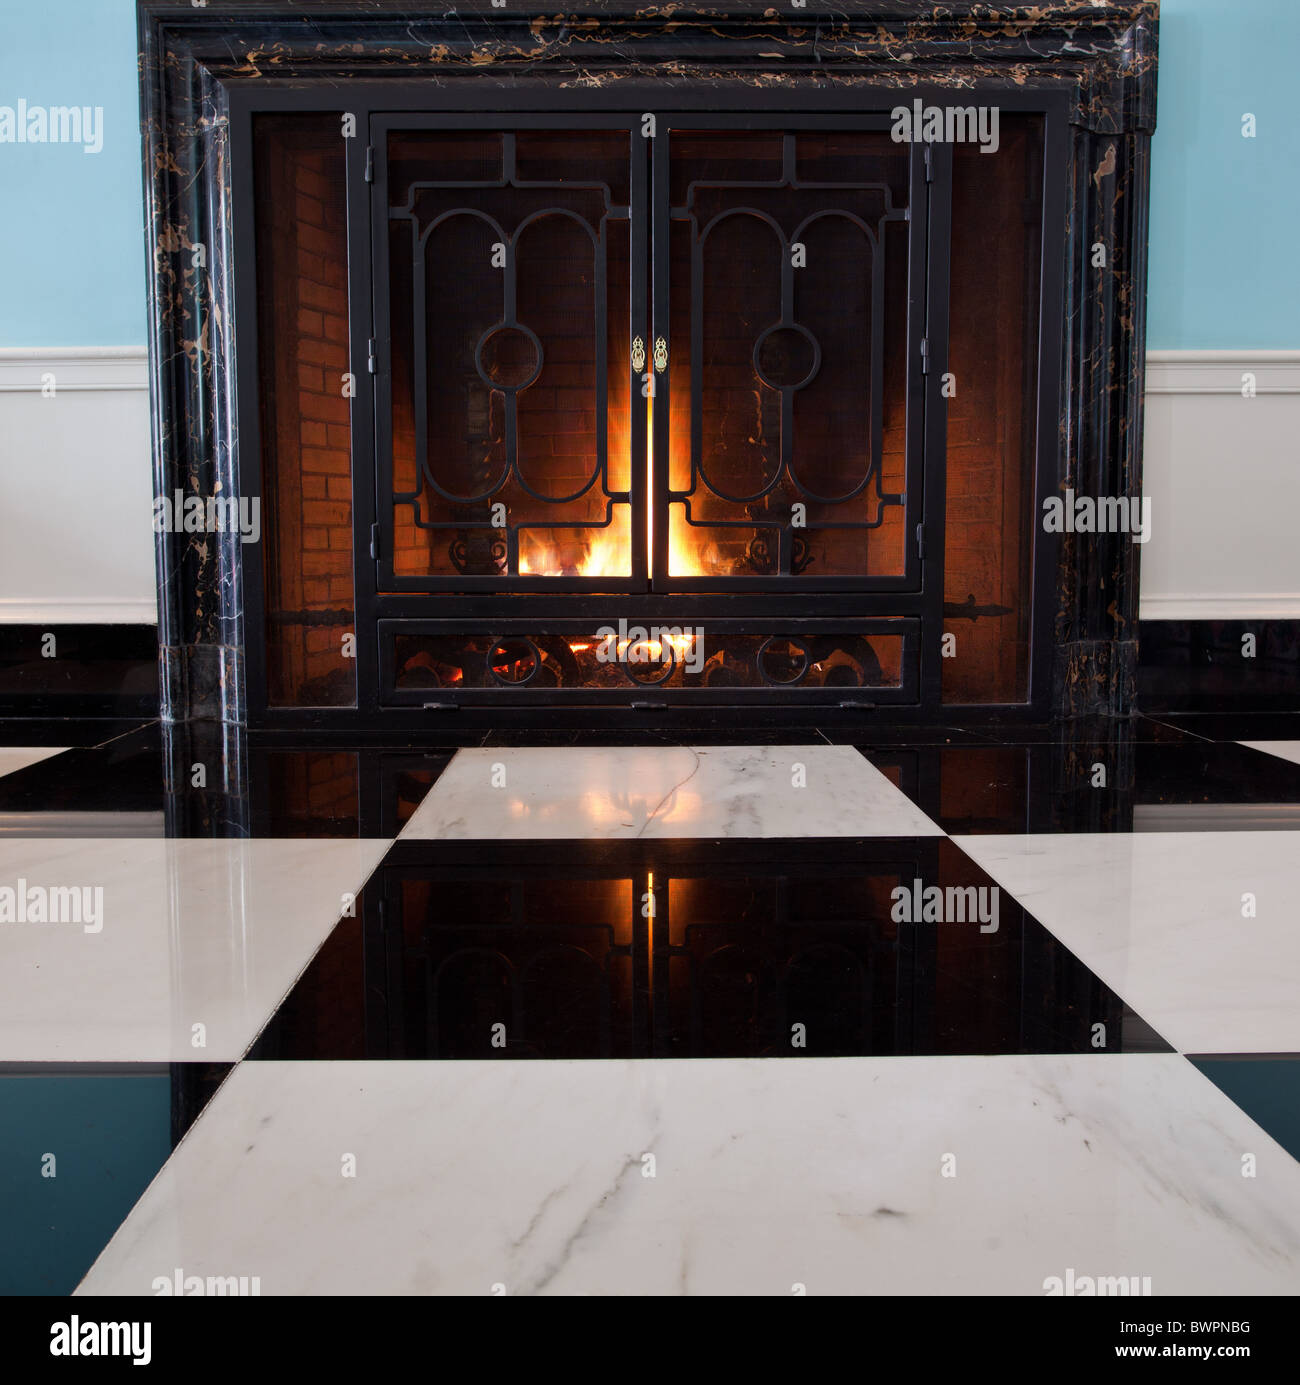 fire Alamy - hi-res and antique images photography Fireplace logs stock